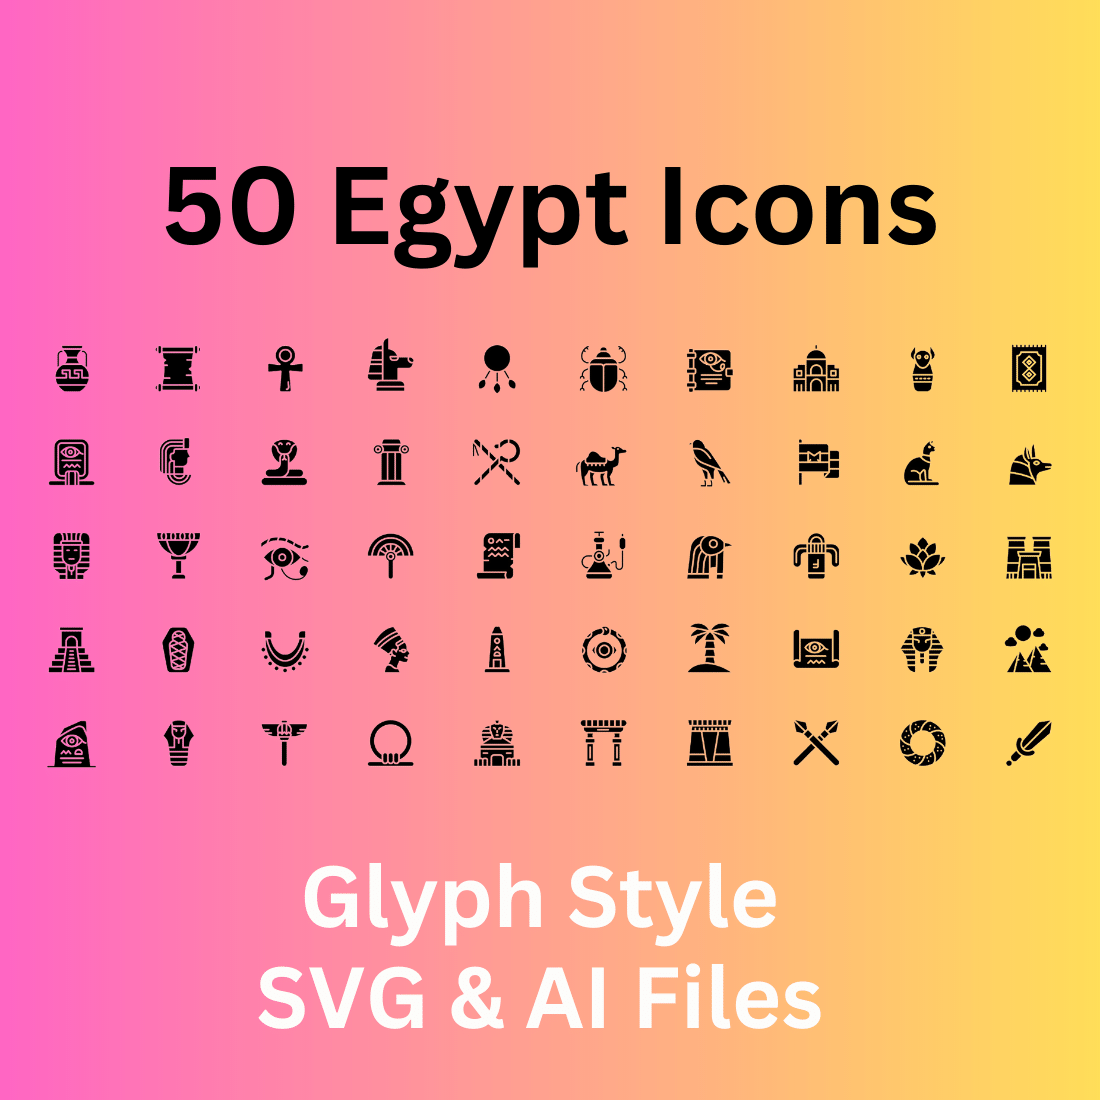 Egypt Icon Set 50 Glyph Icons - SVG And AI Files cover image.